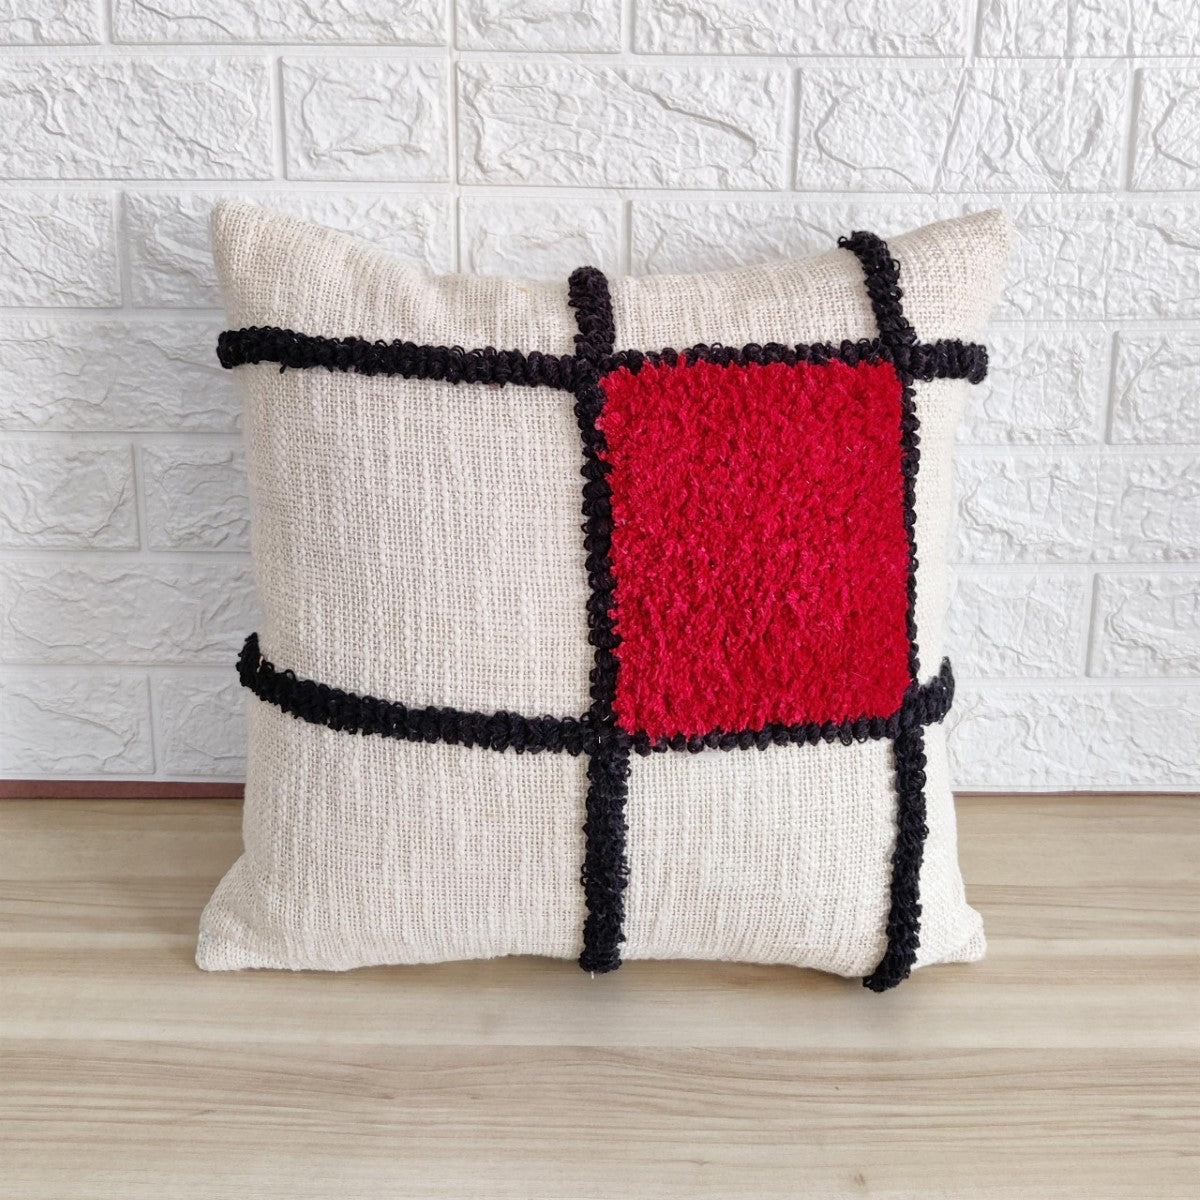 Ivory & Red Tufted Cotton Cushion Cover